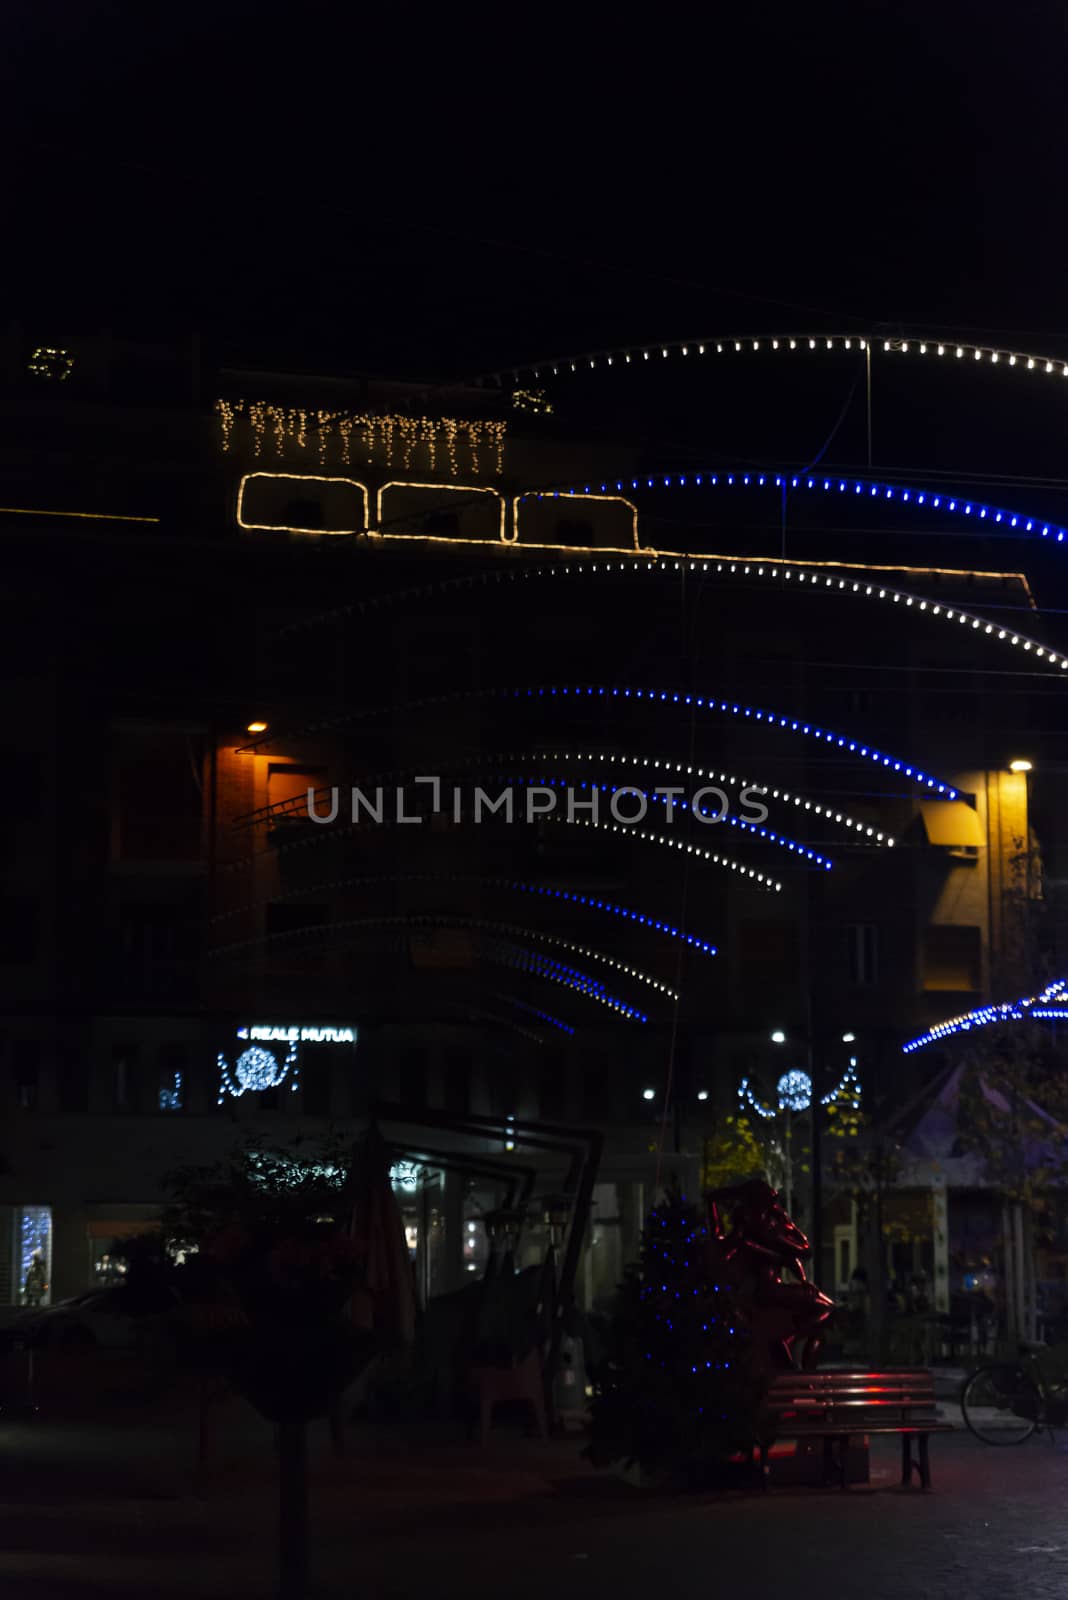 Christmas decorations in the city with light strips and projections